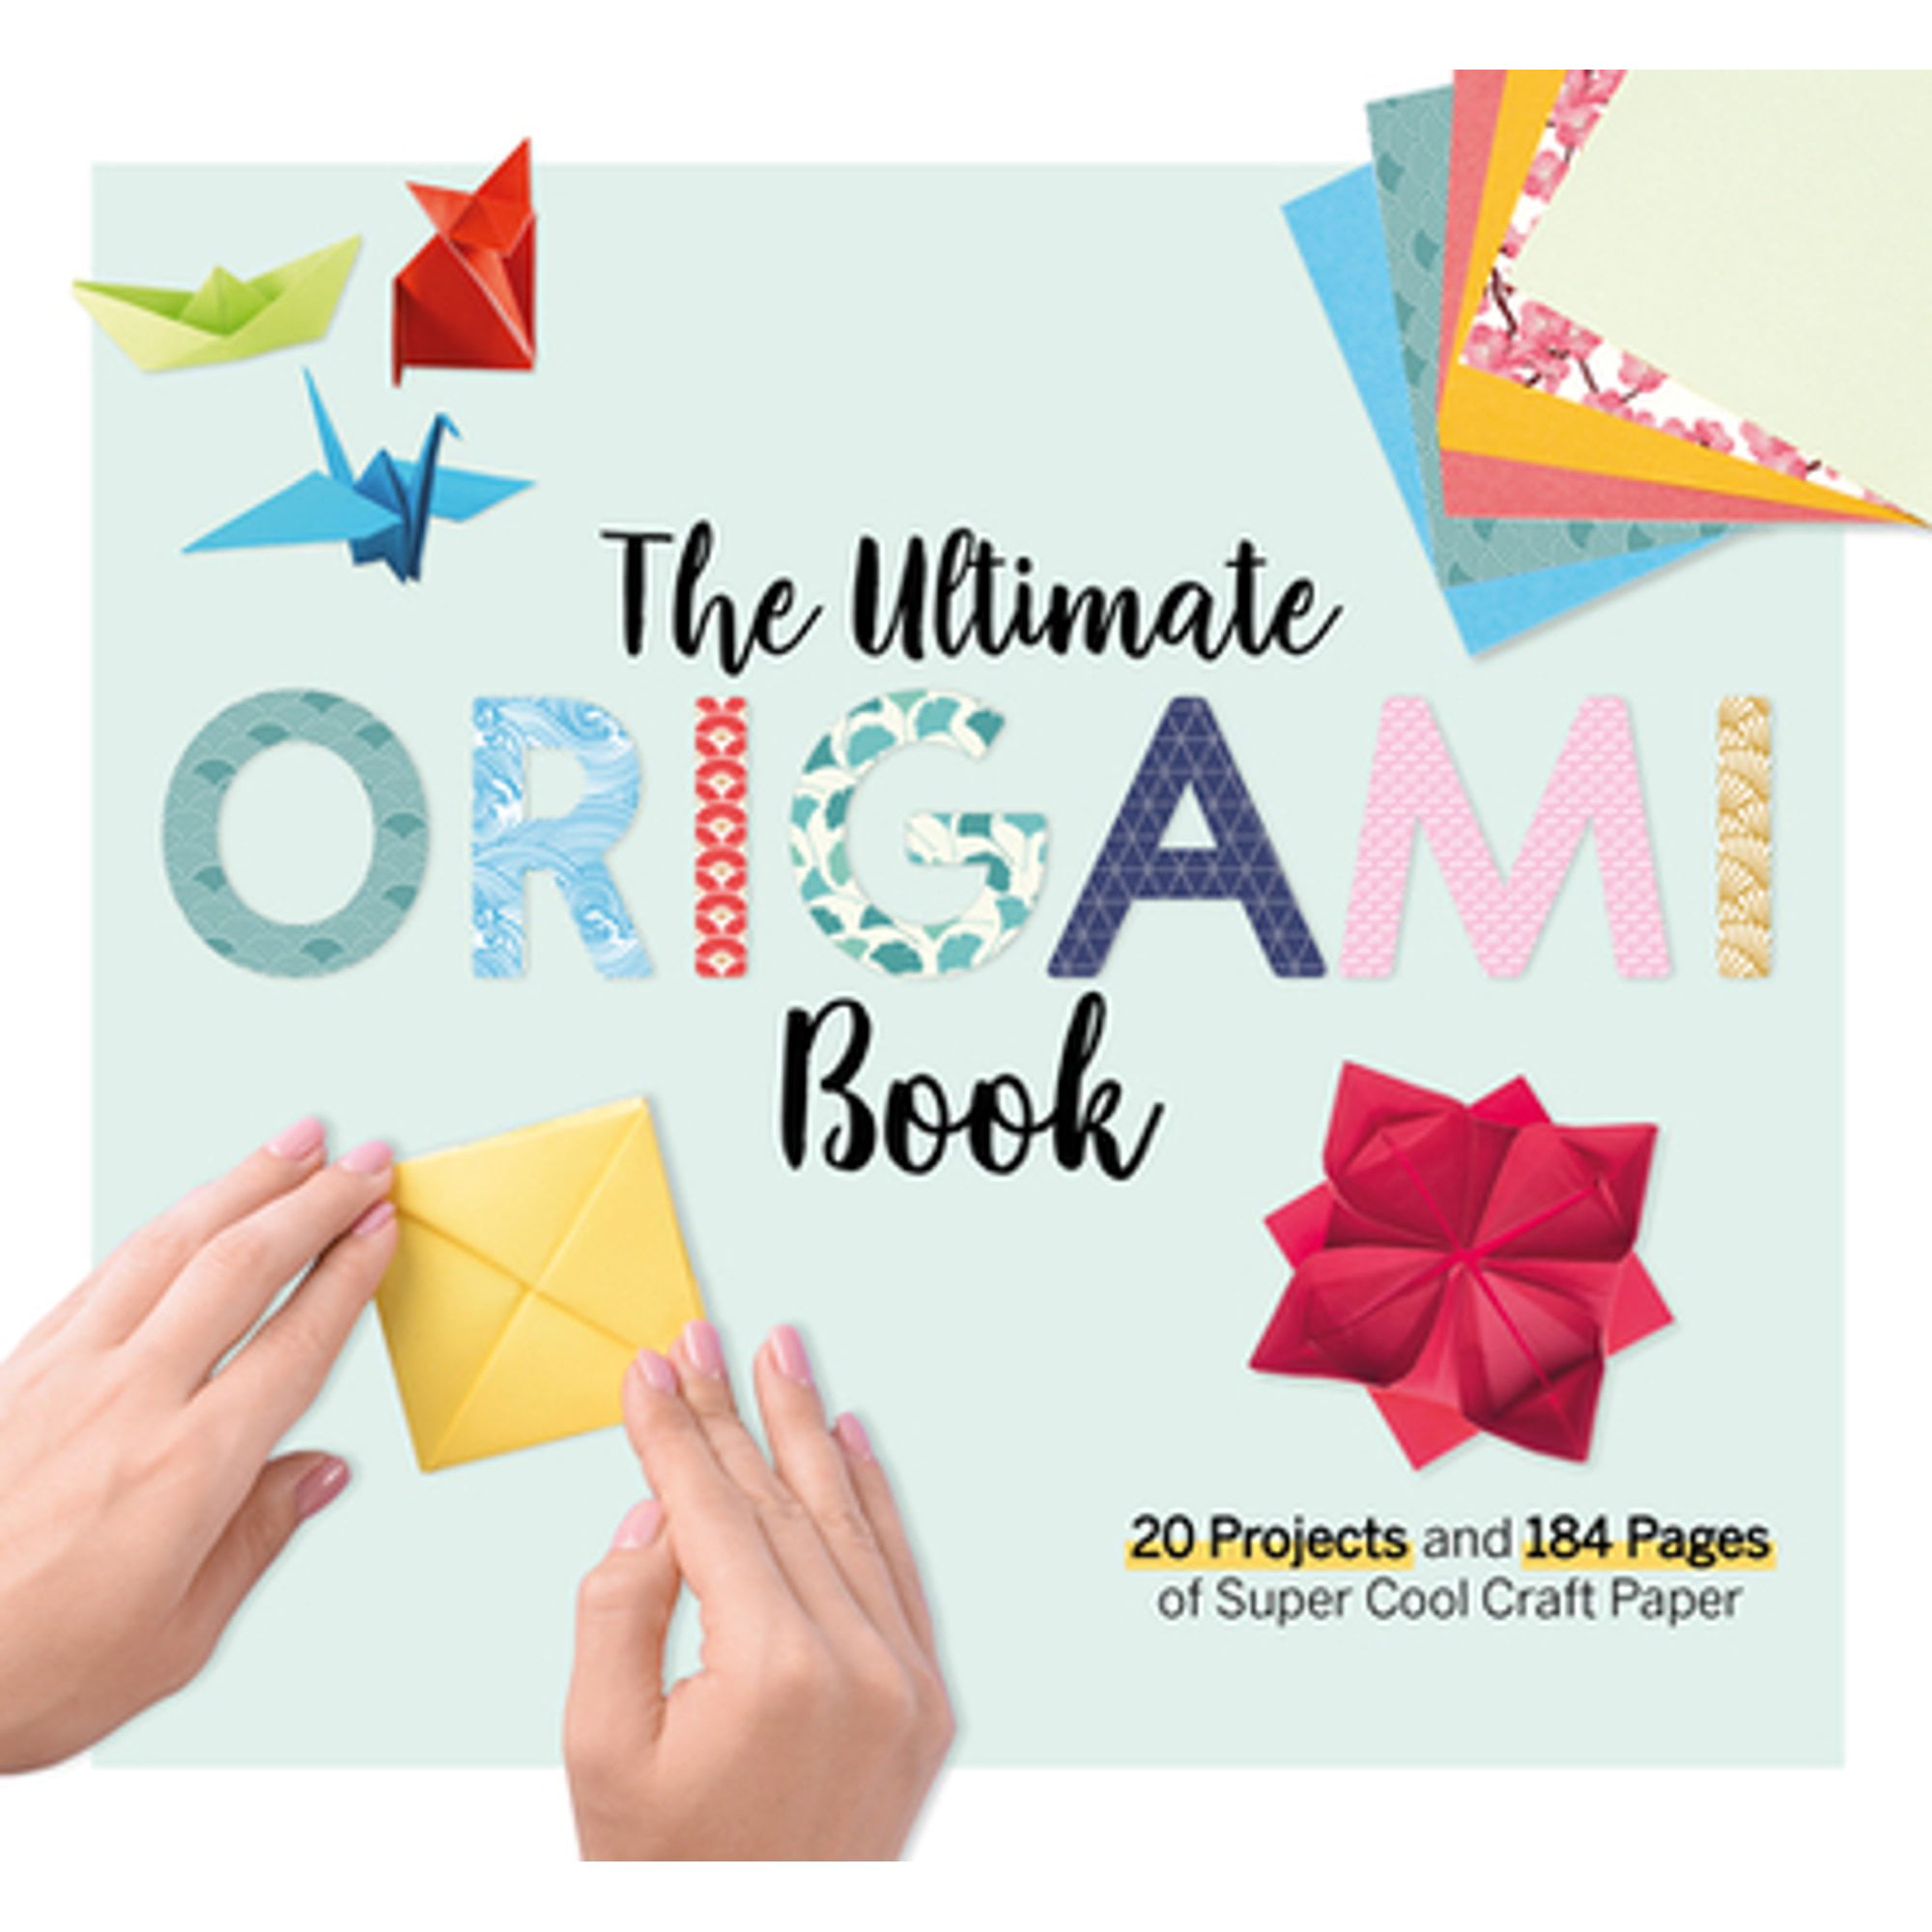 The Ultimate Origami Book: 20 Projects and 184 Pages of Super Cool Craft Paper [Book]